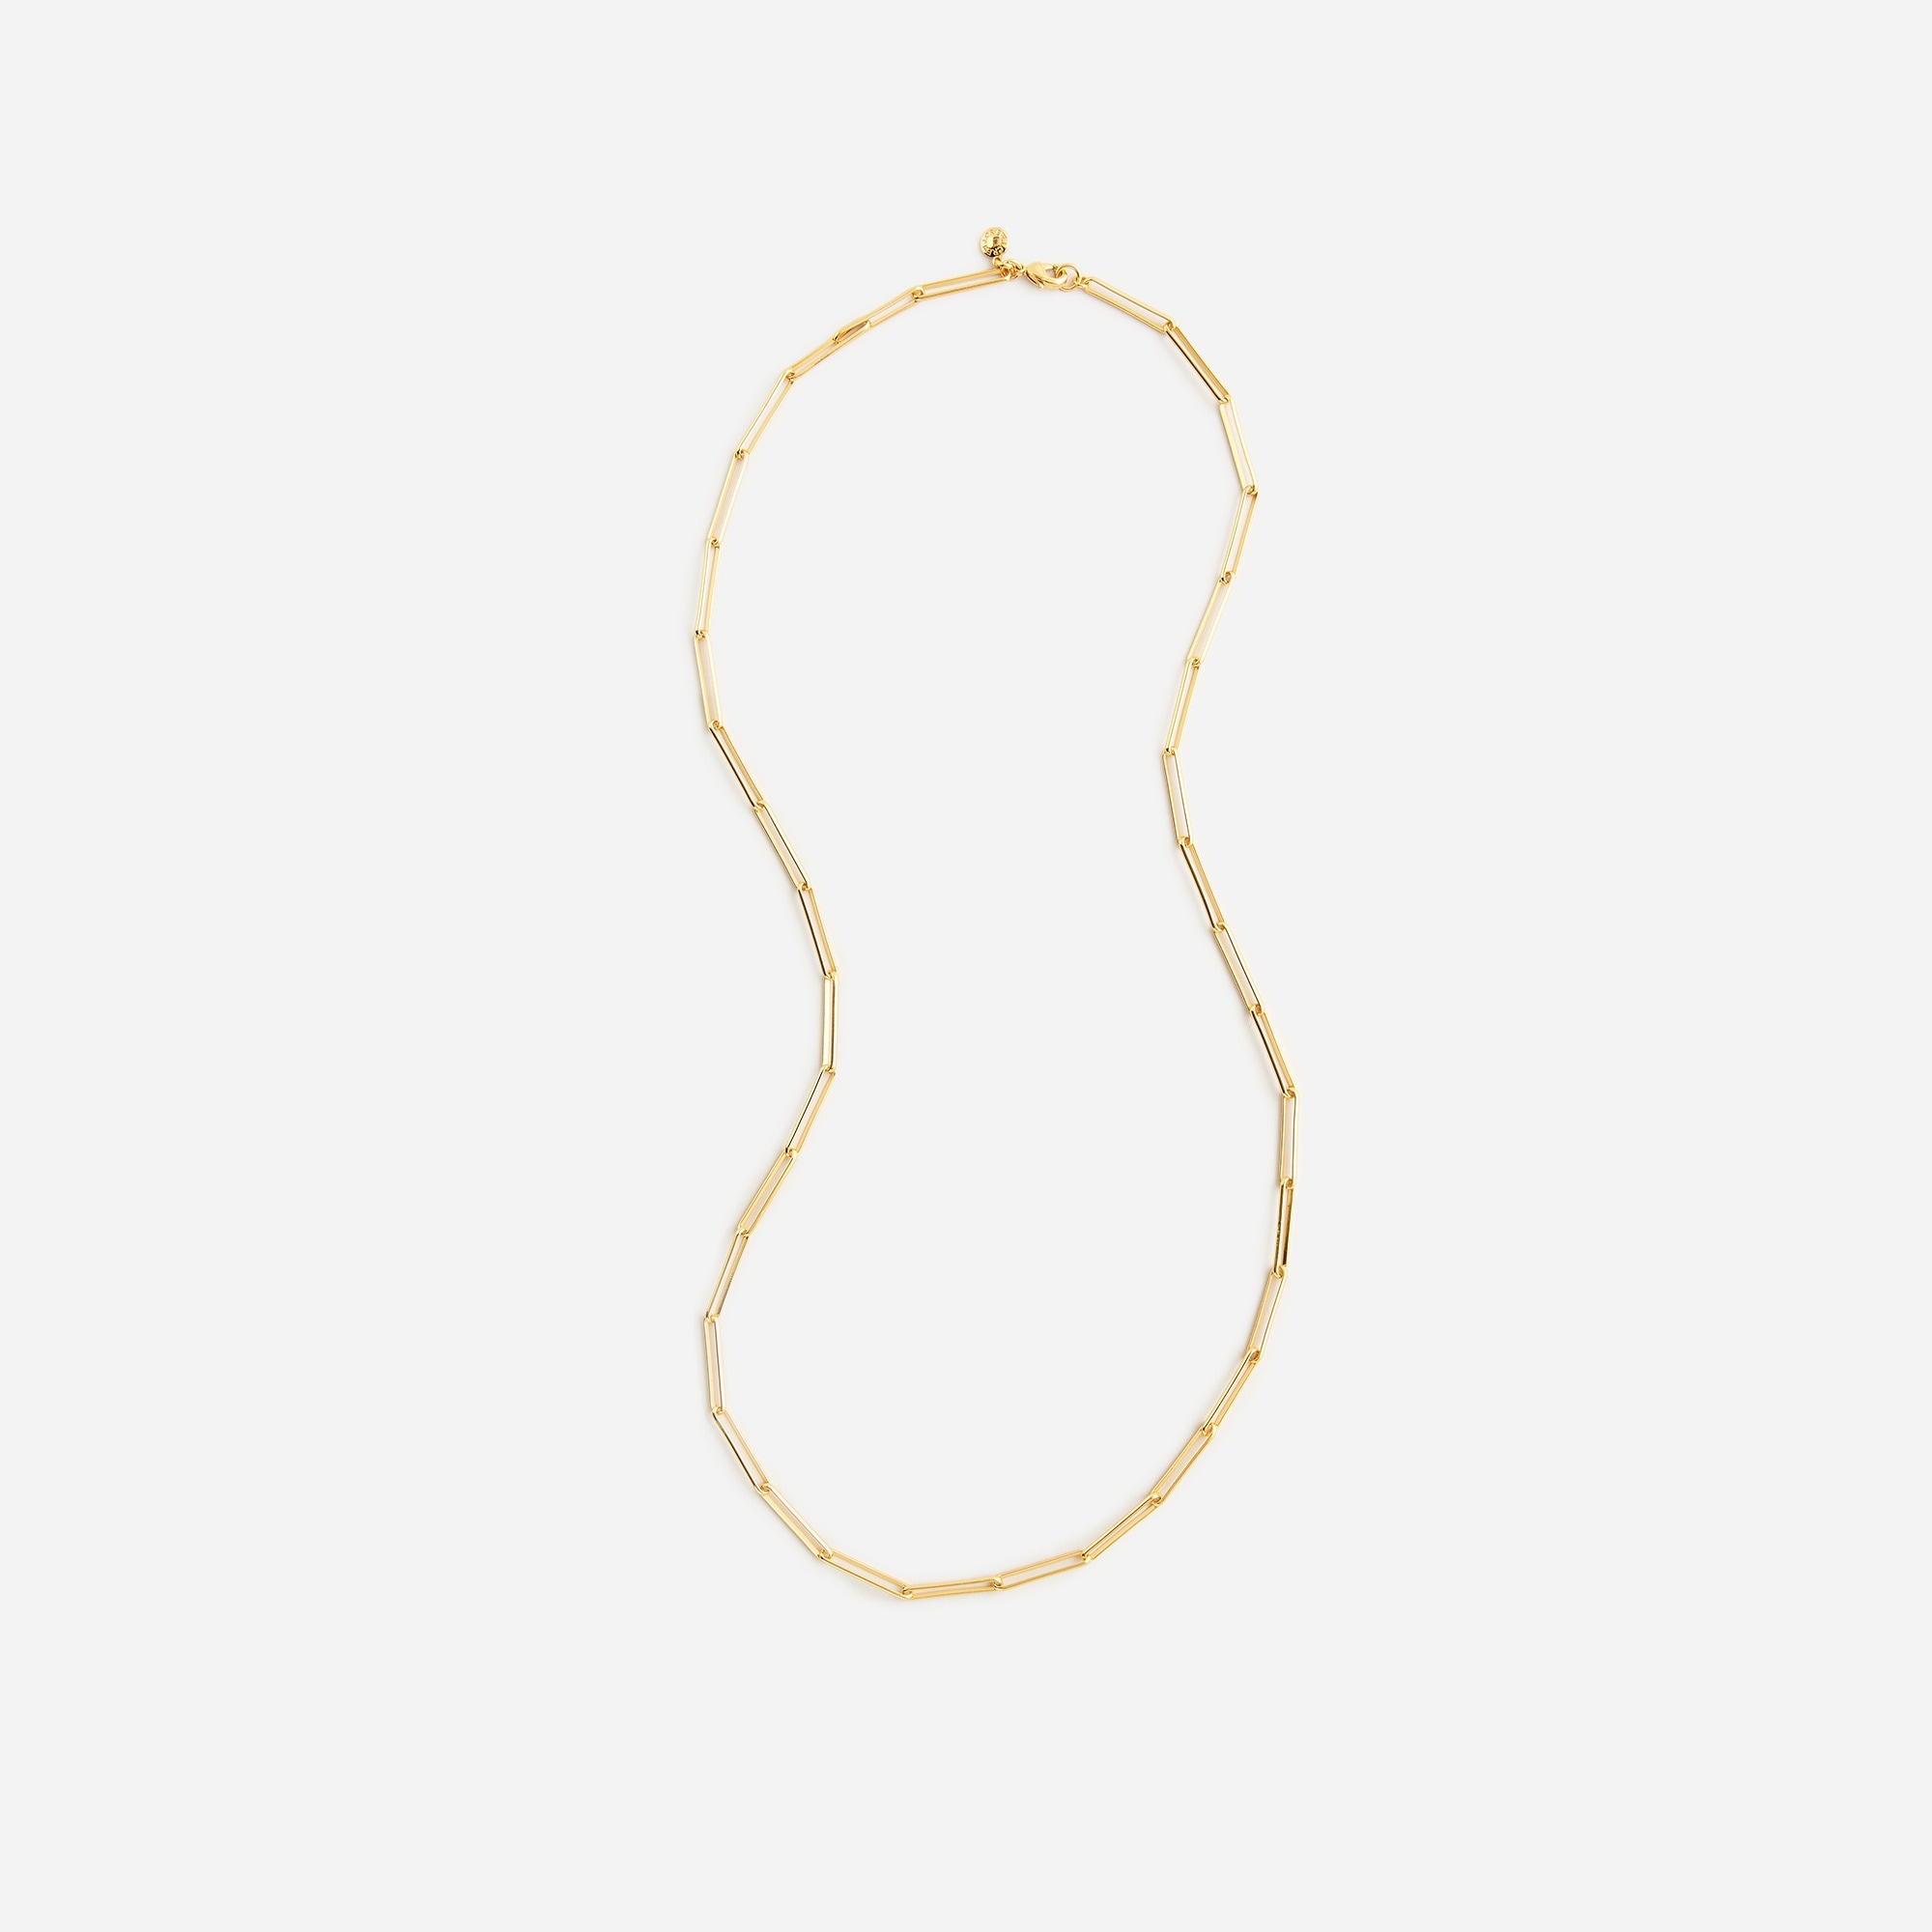 Jcrew Dainty gold-plated paper-clip necklace